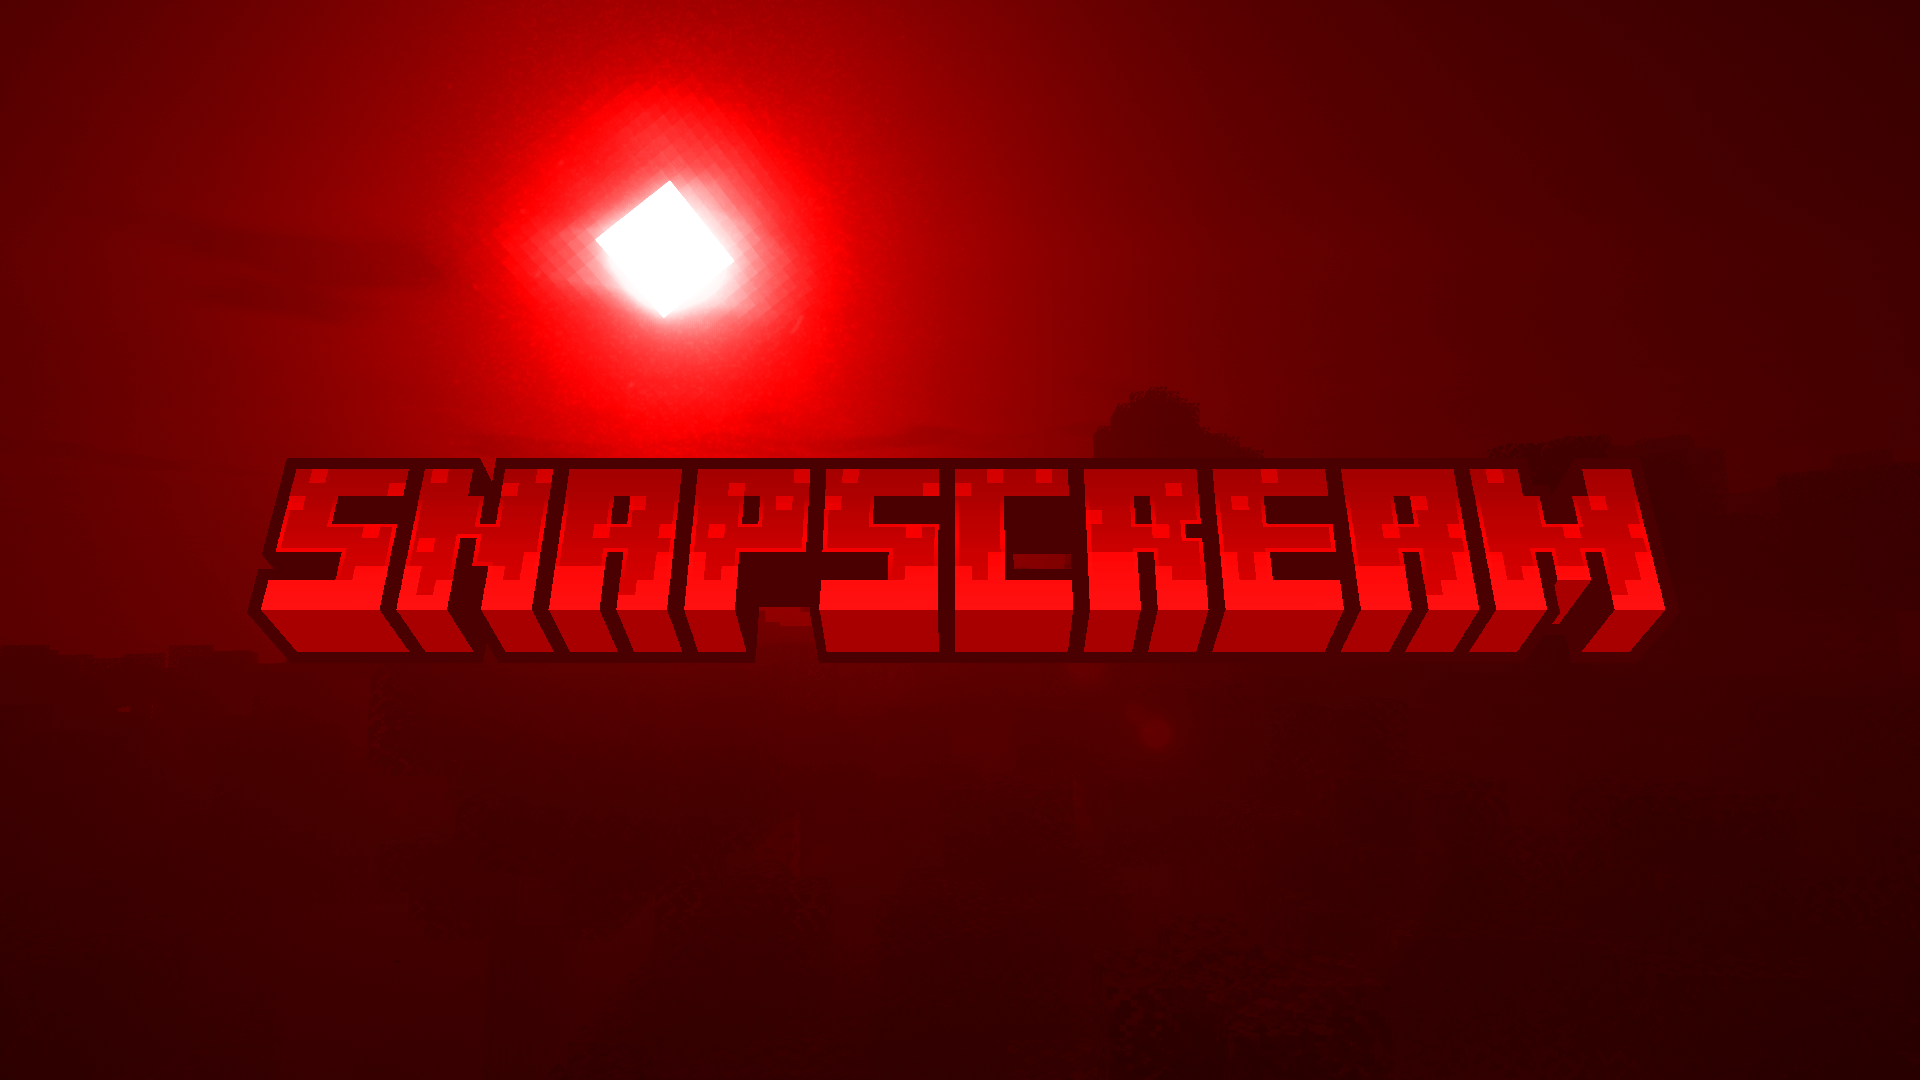 This picture shows the banner for Snapscream.